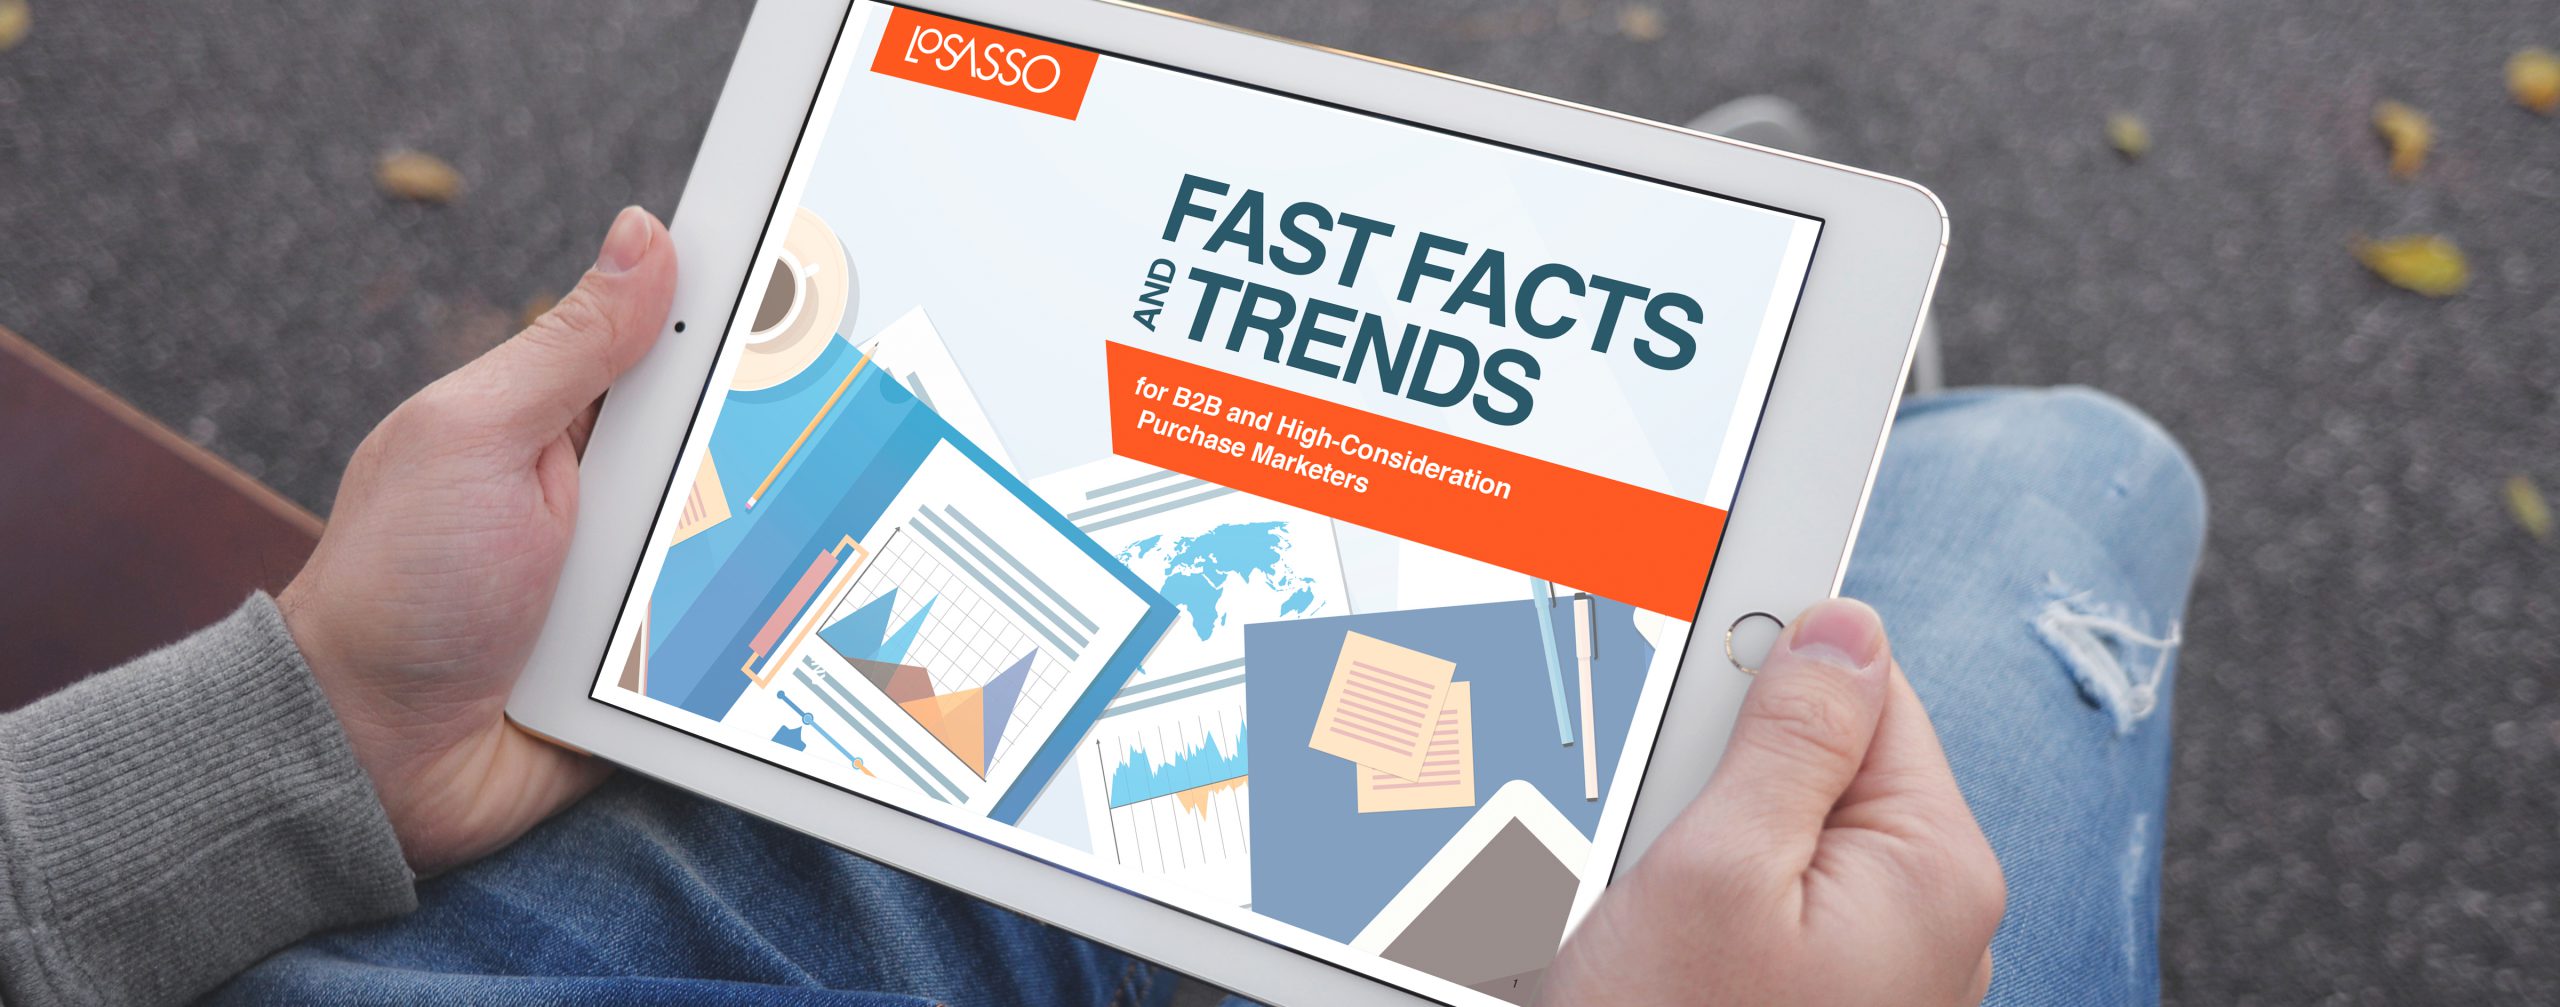 Fast facts and trends for B2B and high-consideration purchase marketers